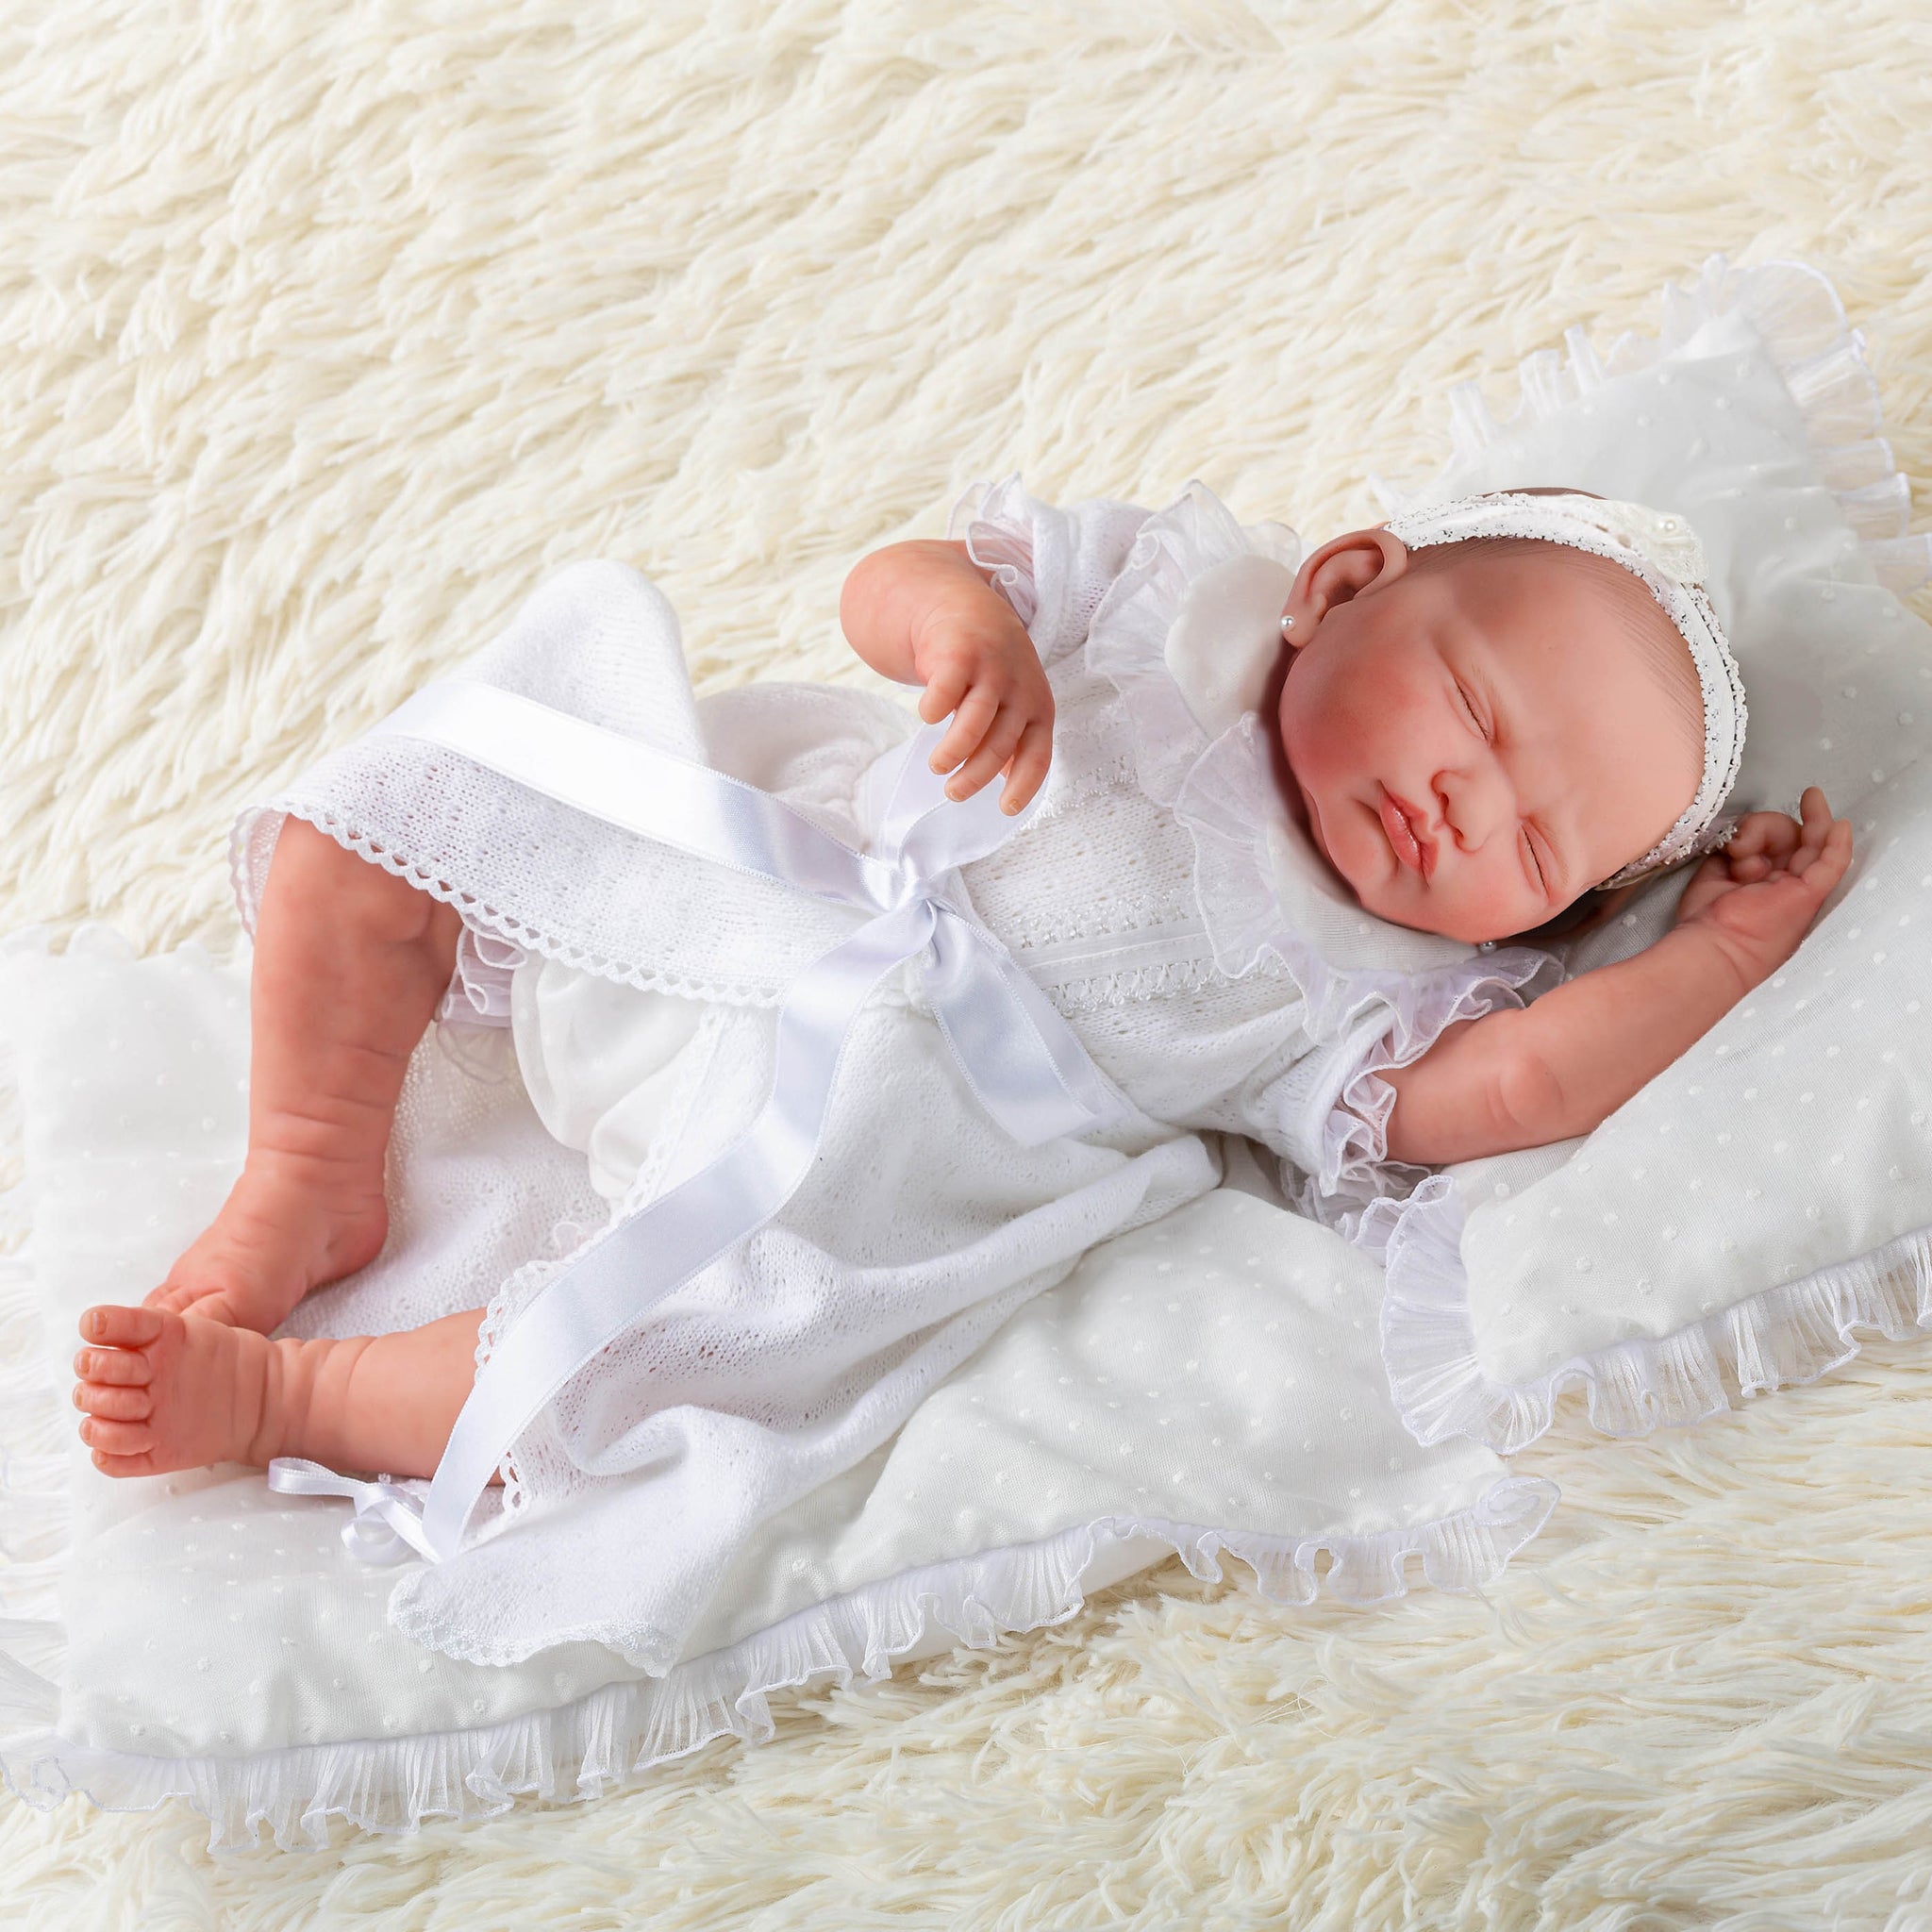 Berenguer Reborn Classics Leonor 18" Baby Doll Made by Hand Limited Edition Collectable featuring Elegant Christening Outfit